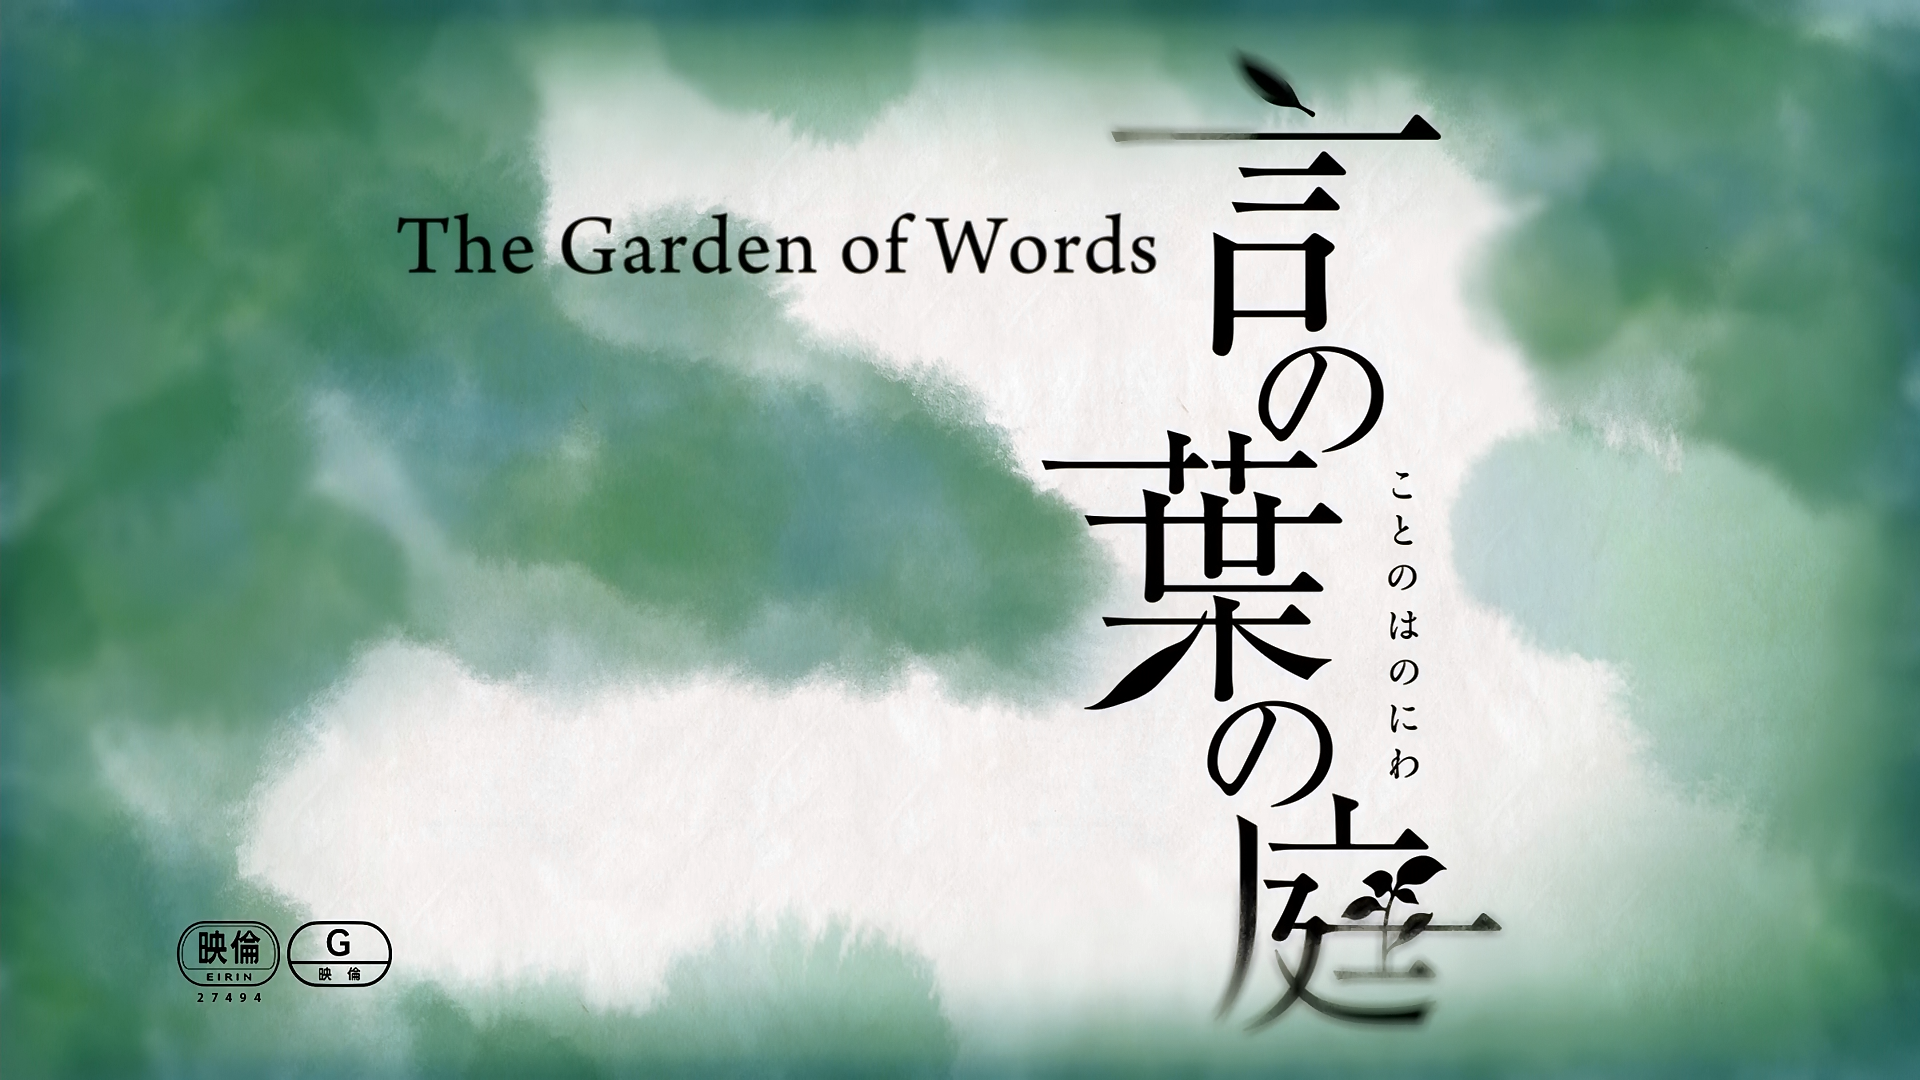 The Garden Of Words Full HD Wallpaper and Background Image | 1920x1080